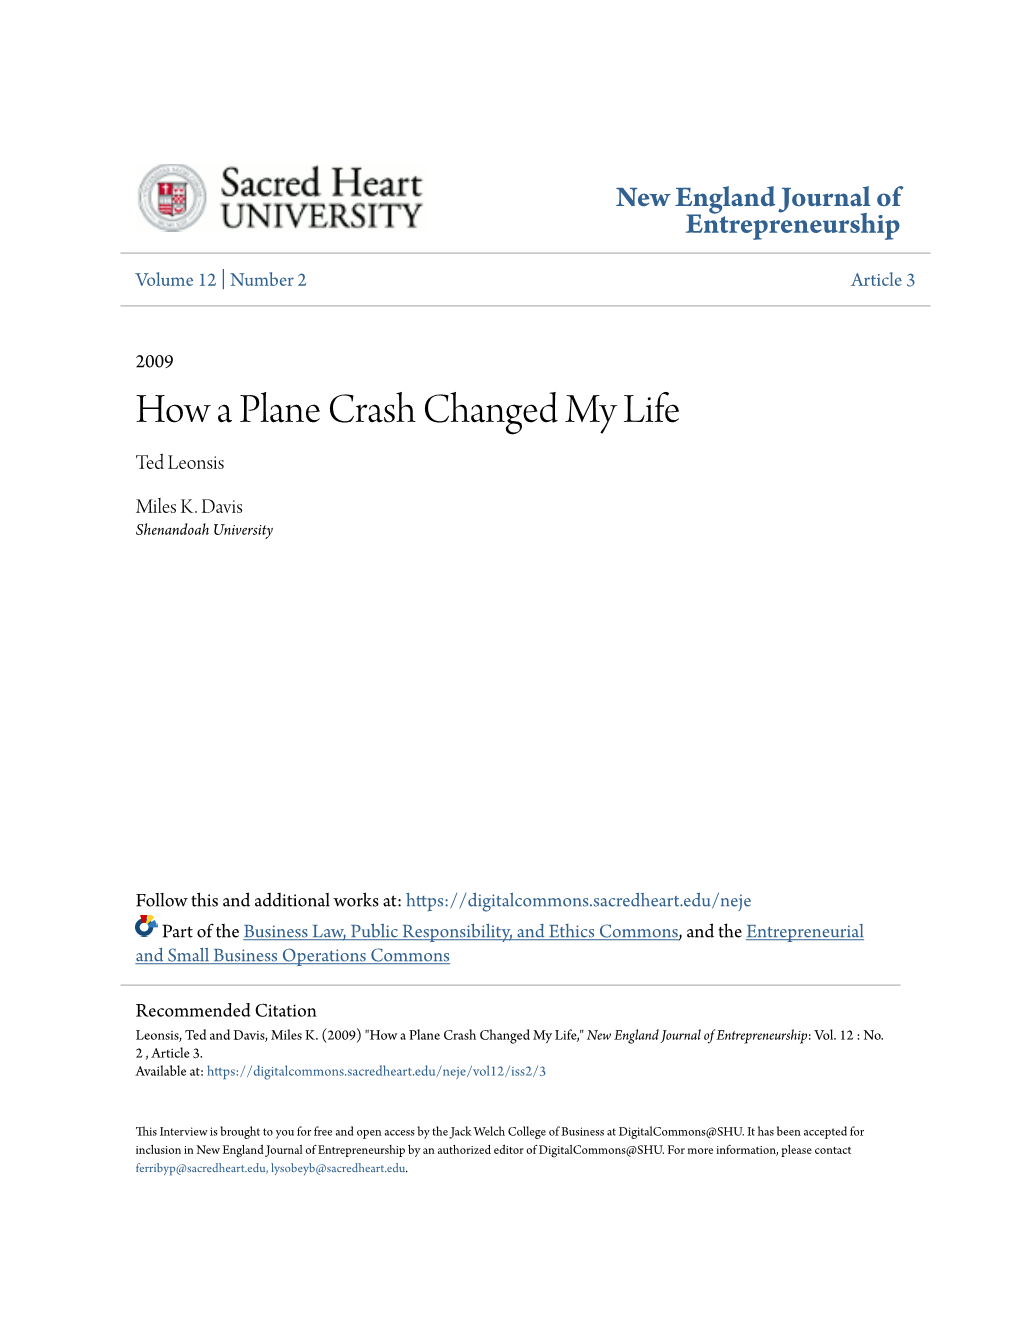 How a Plane Crash Changed My Life Ted Leonsis